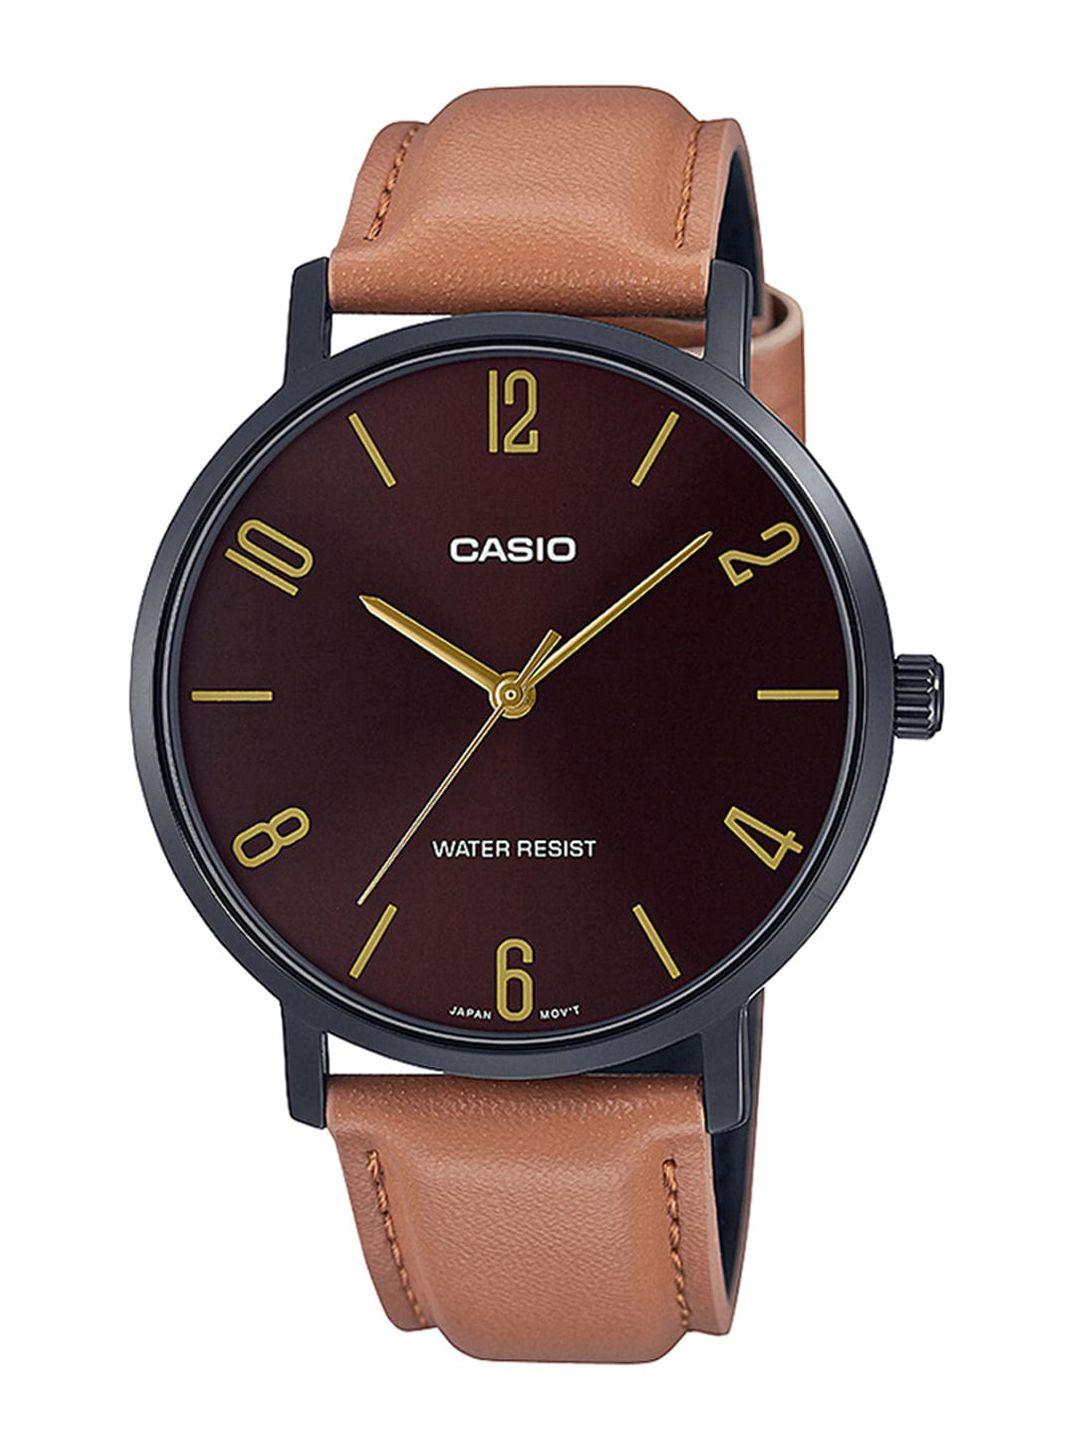 CASIO Men Brown Dial & Brown Leather Straps Analogue Watch A1978